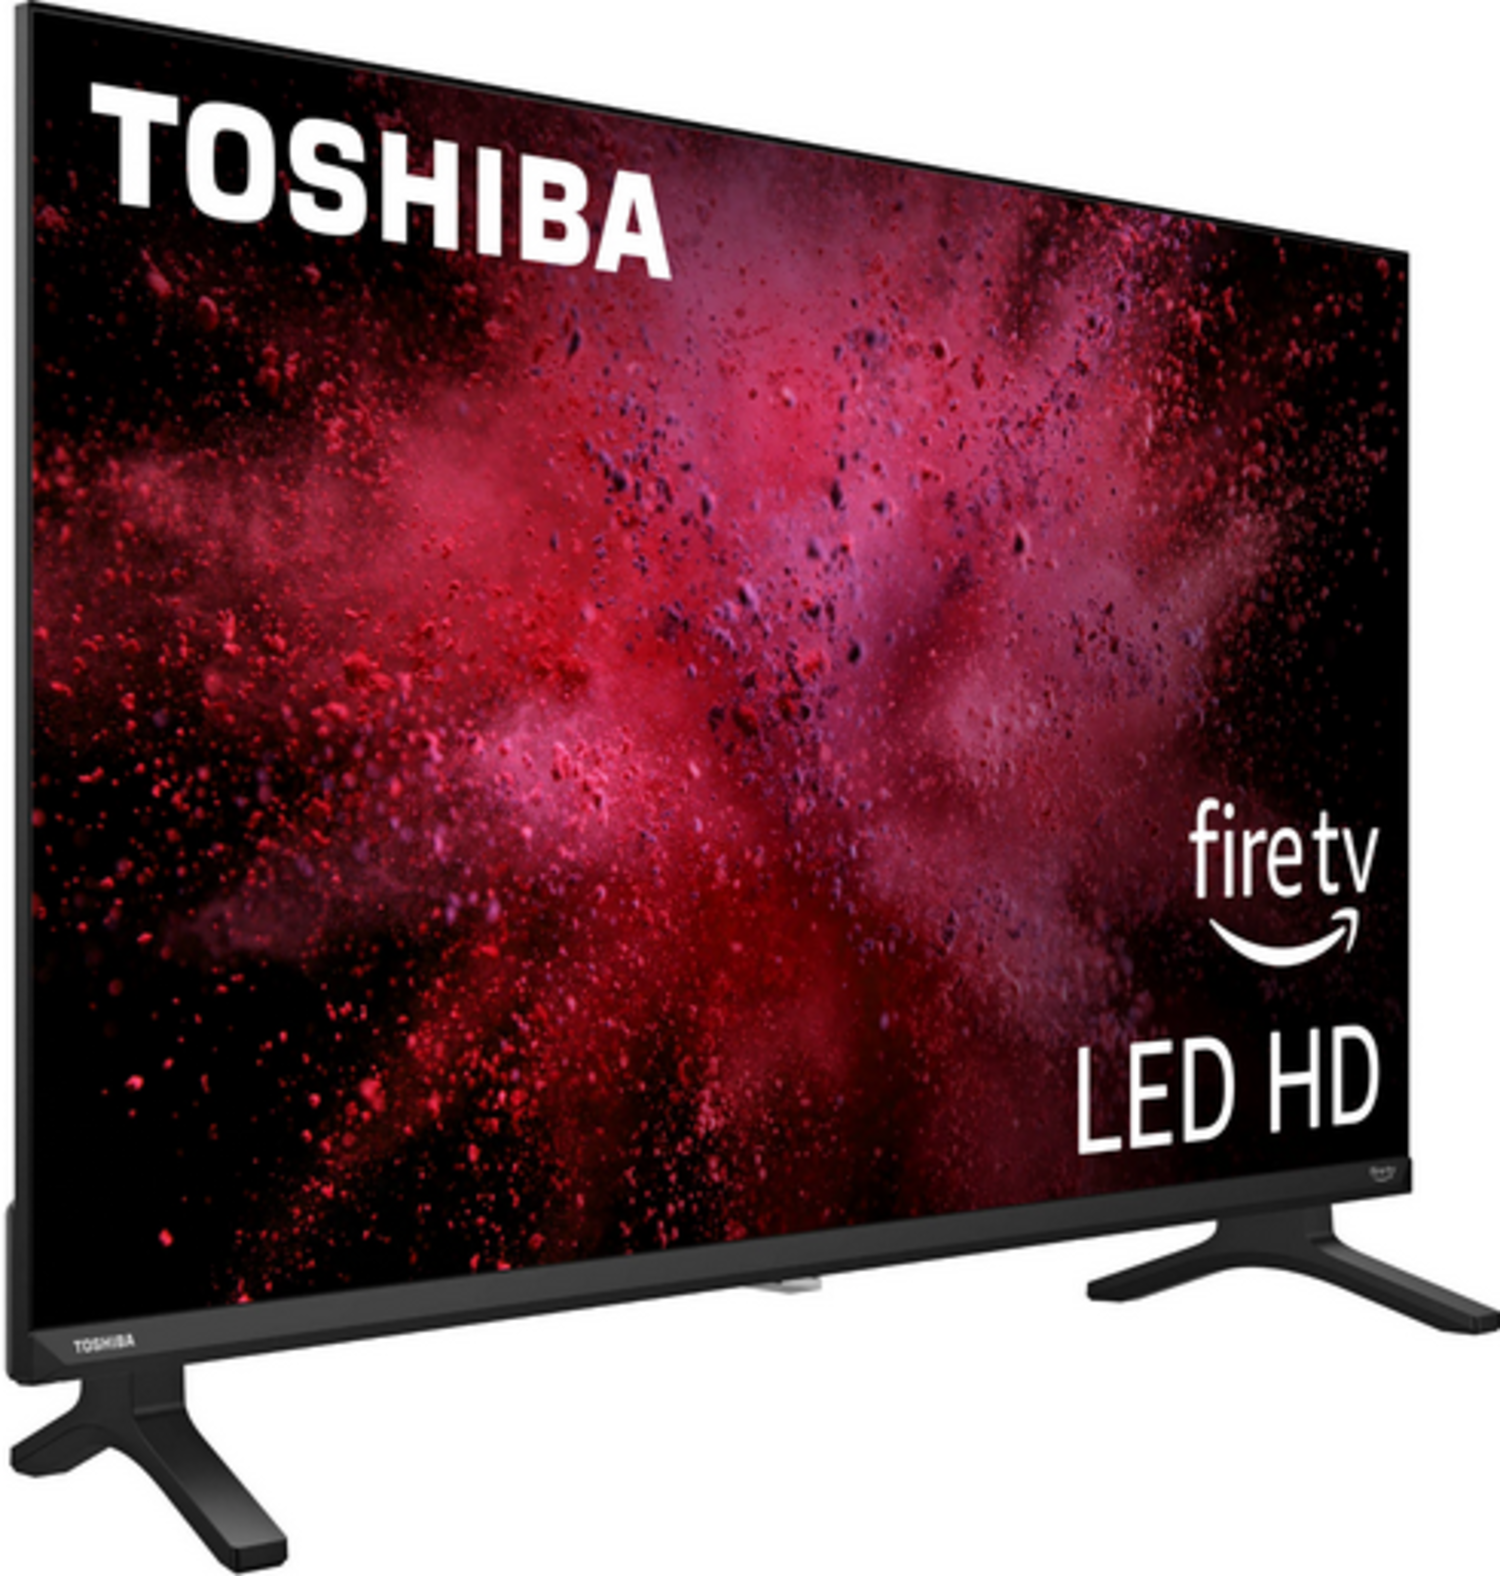 Toshiba 32-inch Class V35 Series LED HD Smart Fire TV (32V35KU, 2021 Model)  for Sale in Pflugerville, TX - OfferUp